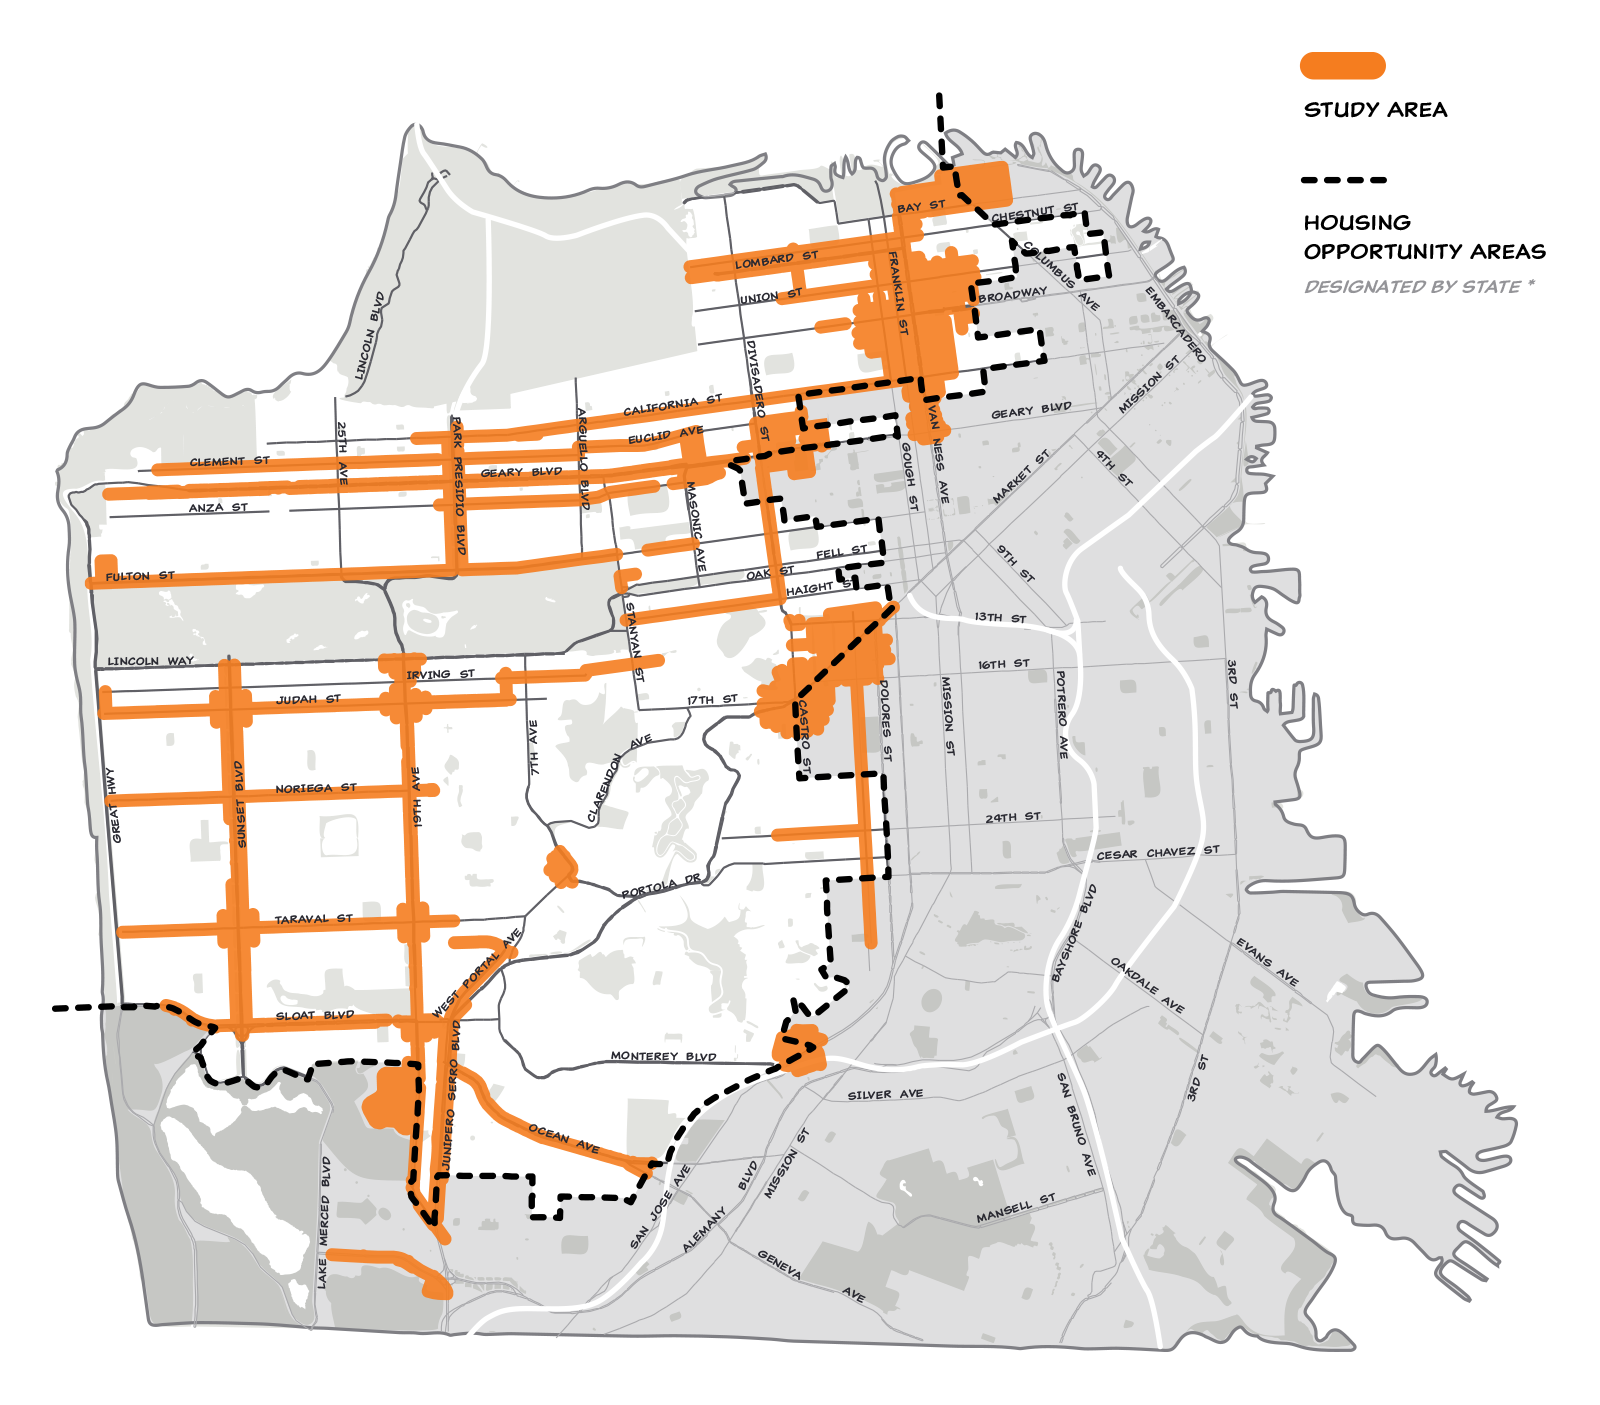 Map of San Francisco that illustrates corridors, nodes, and large sites that the City will prioritize for additional housing capacity